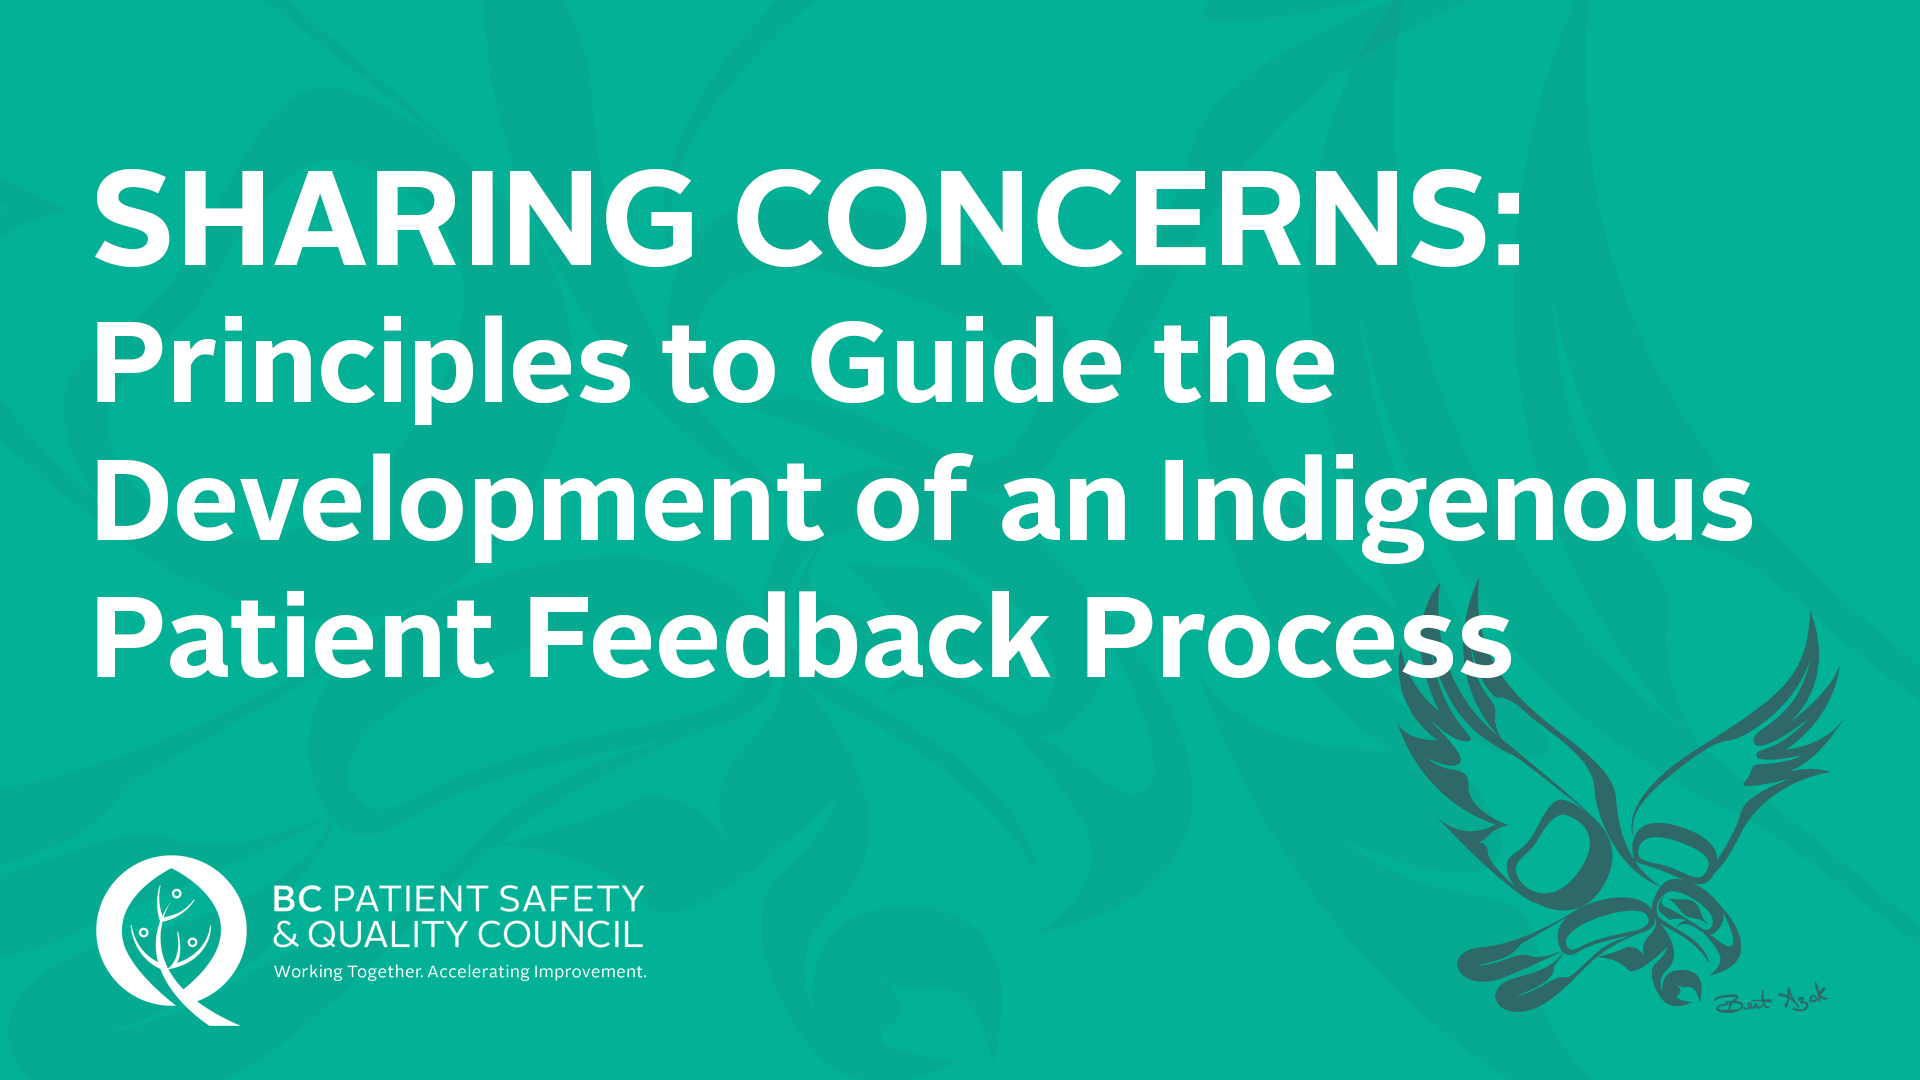 SHARING-CONCERNS-Principles-to-Guide-the-Development-of-an-Indigenous-Patient-Feedback-Process